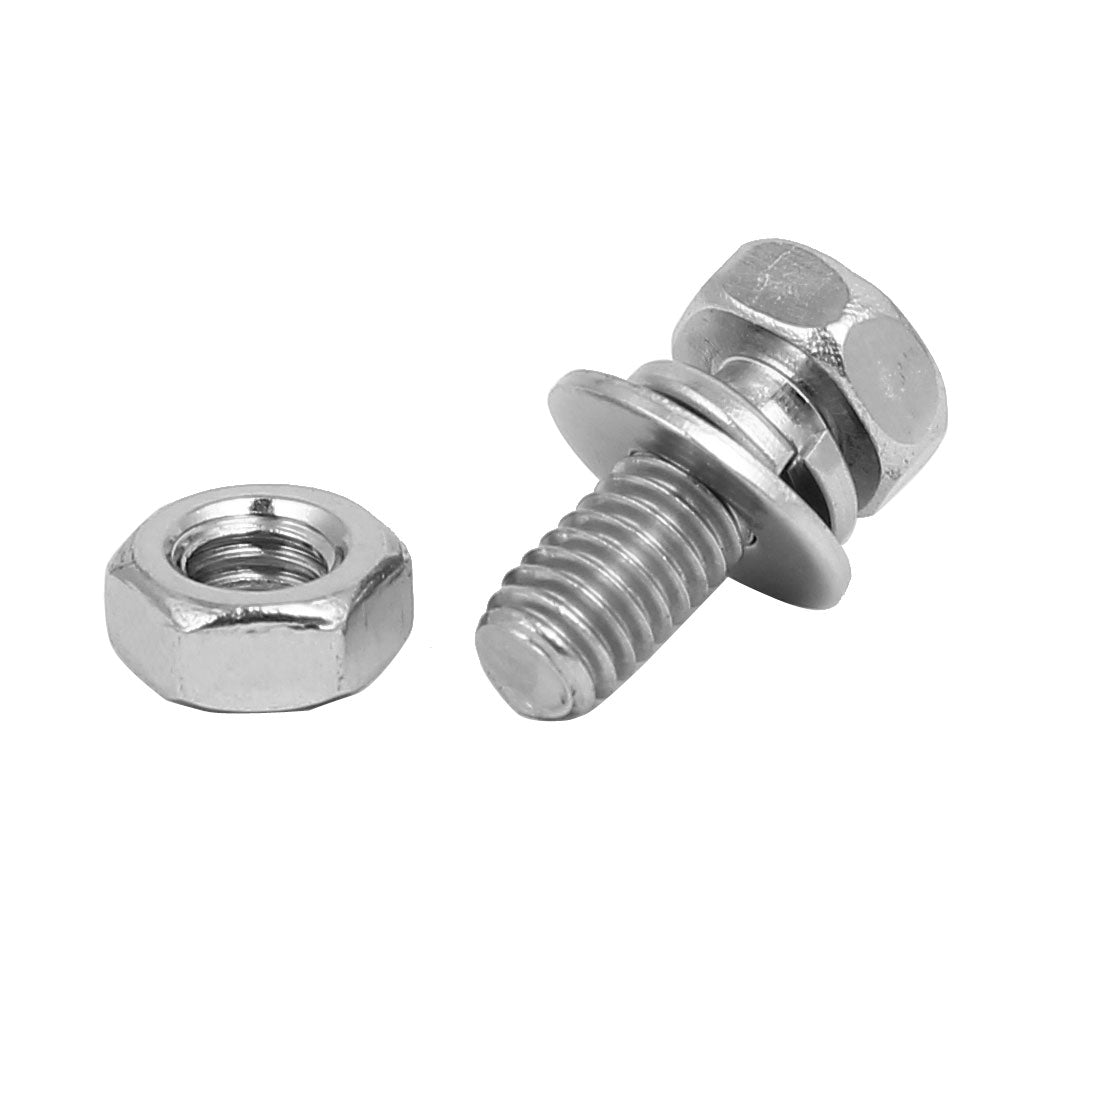 uxcell Uxcell M4 x 10mm 304 Stainless Steel Phillips Hex Head Bolts Nuts w Washers 25 Sets